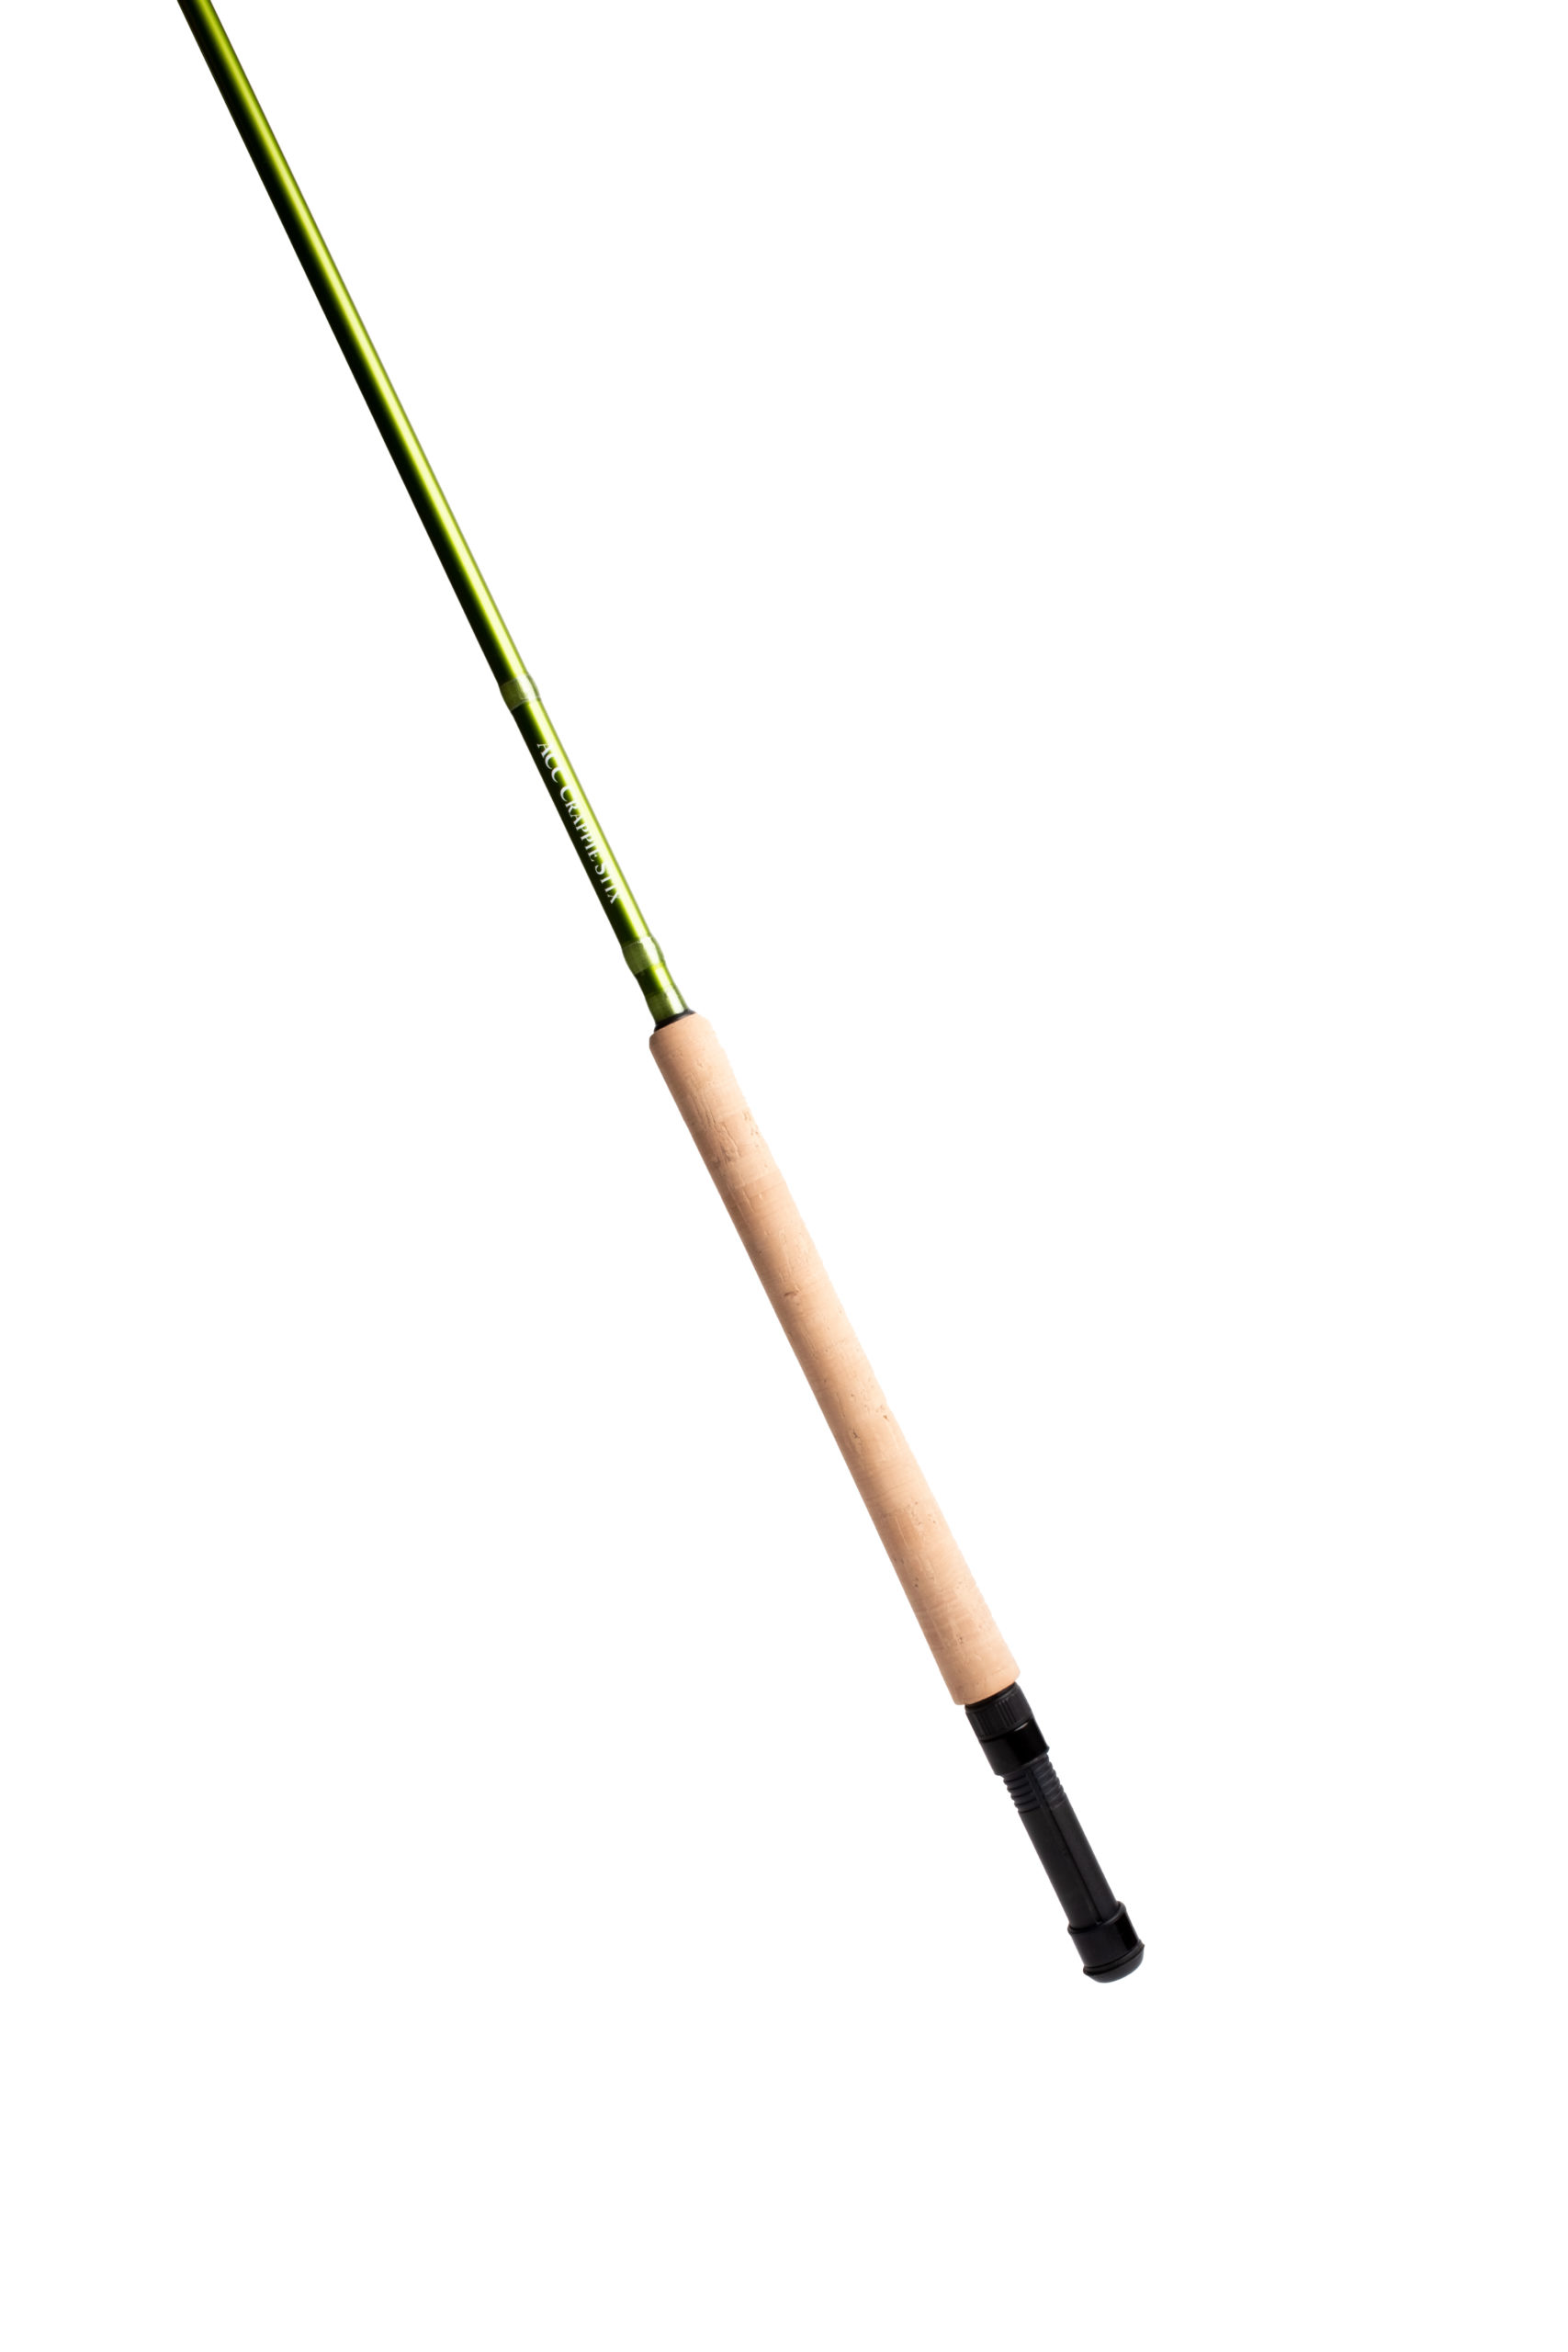 Details about   DENALI ROD NEW PRYME SERIES 10' HEAVY JIGGING CRAPPIE POLE P1201HJ SET OF 3 